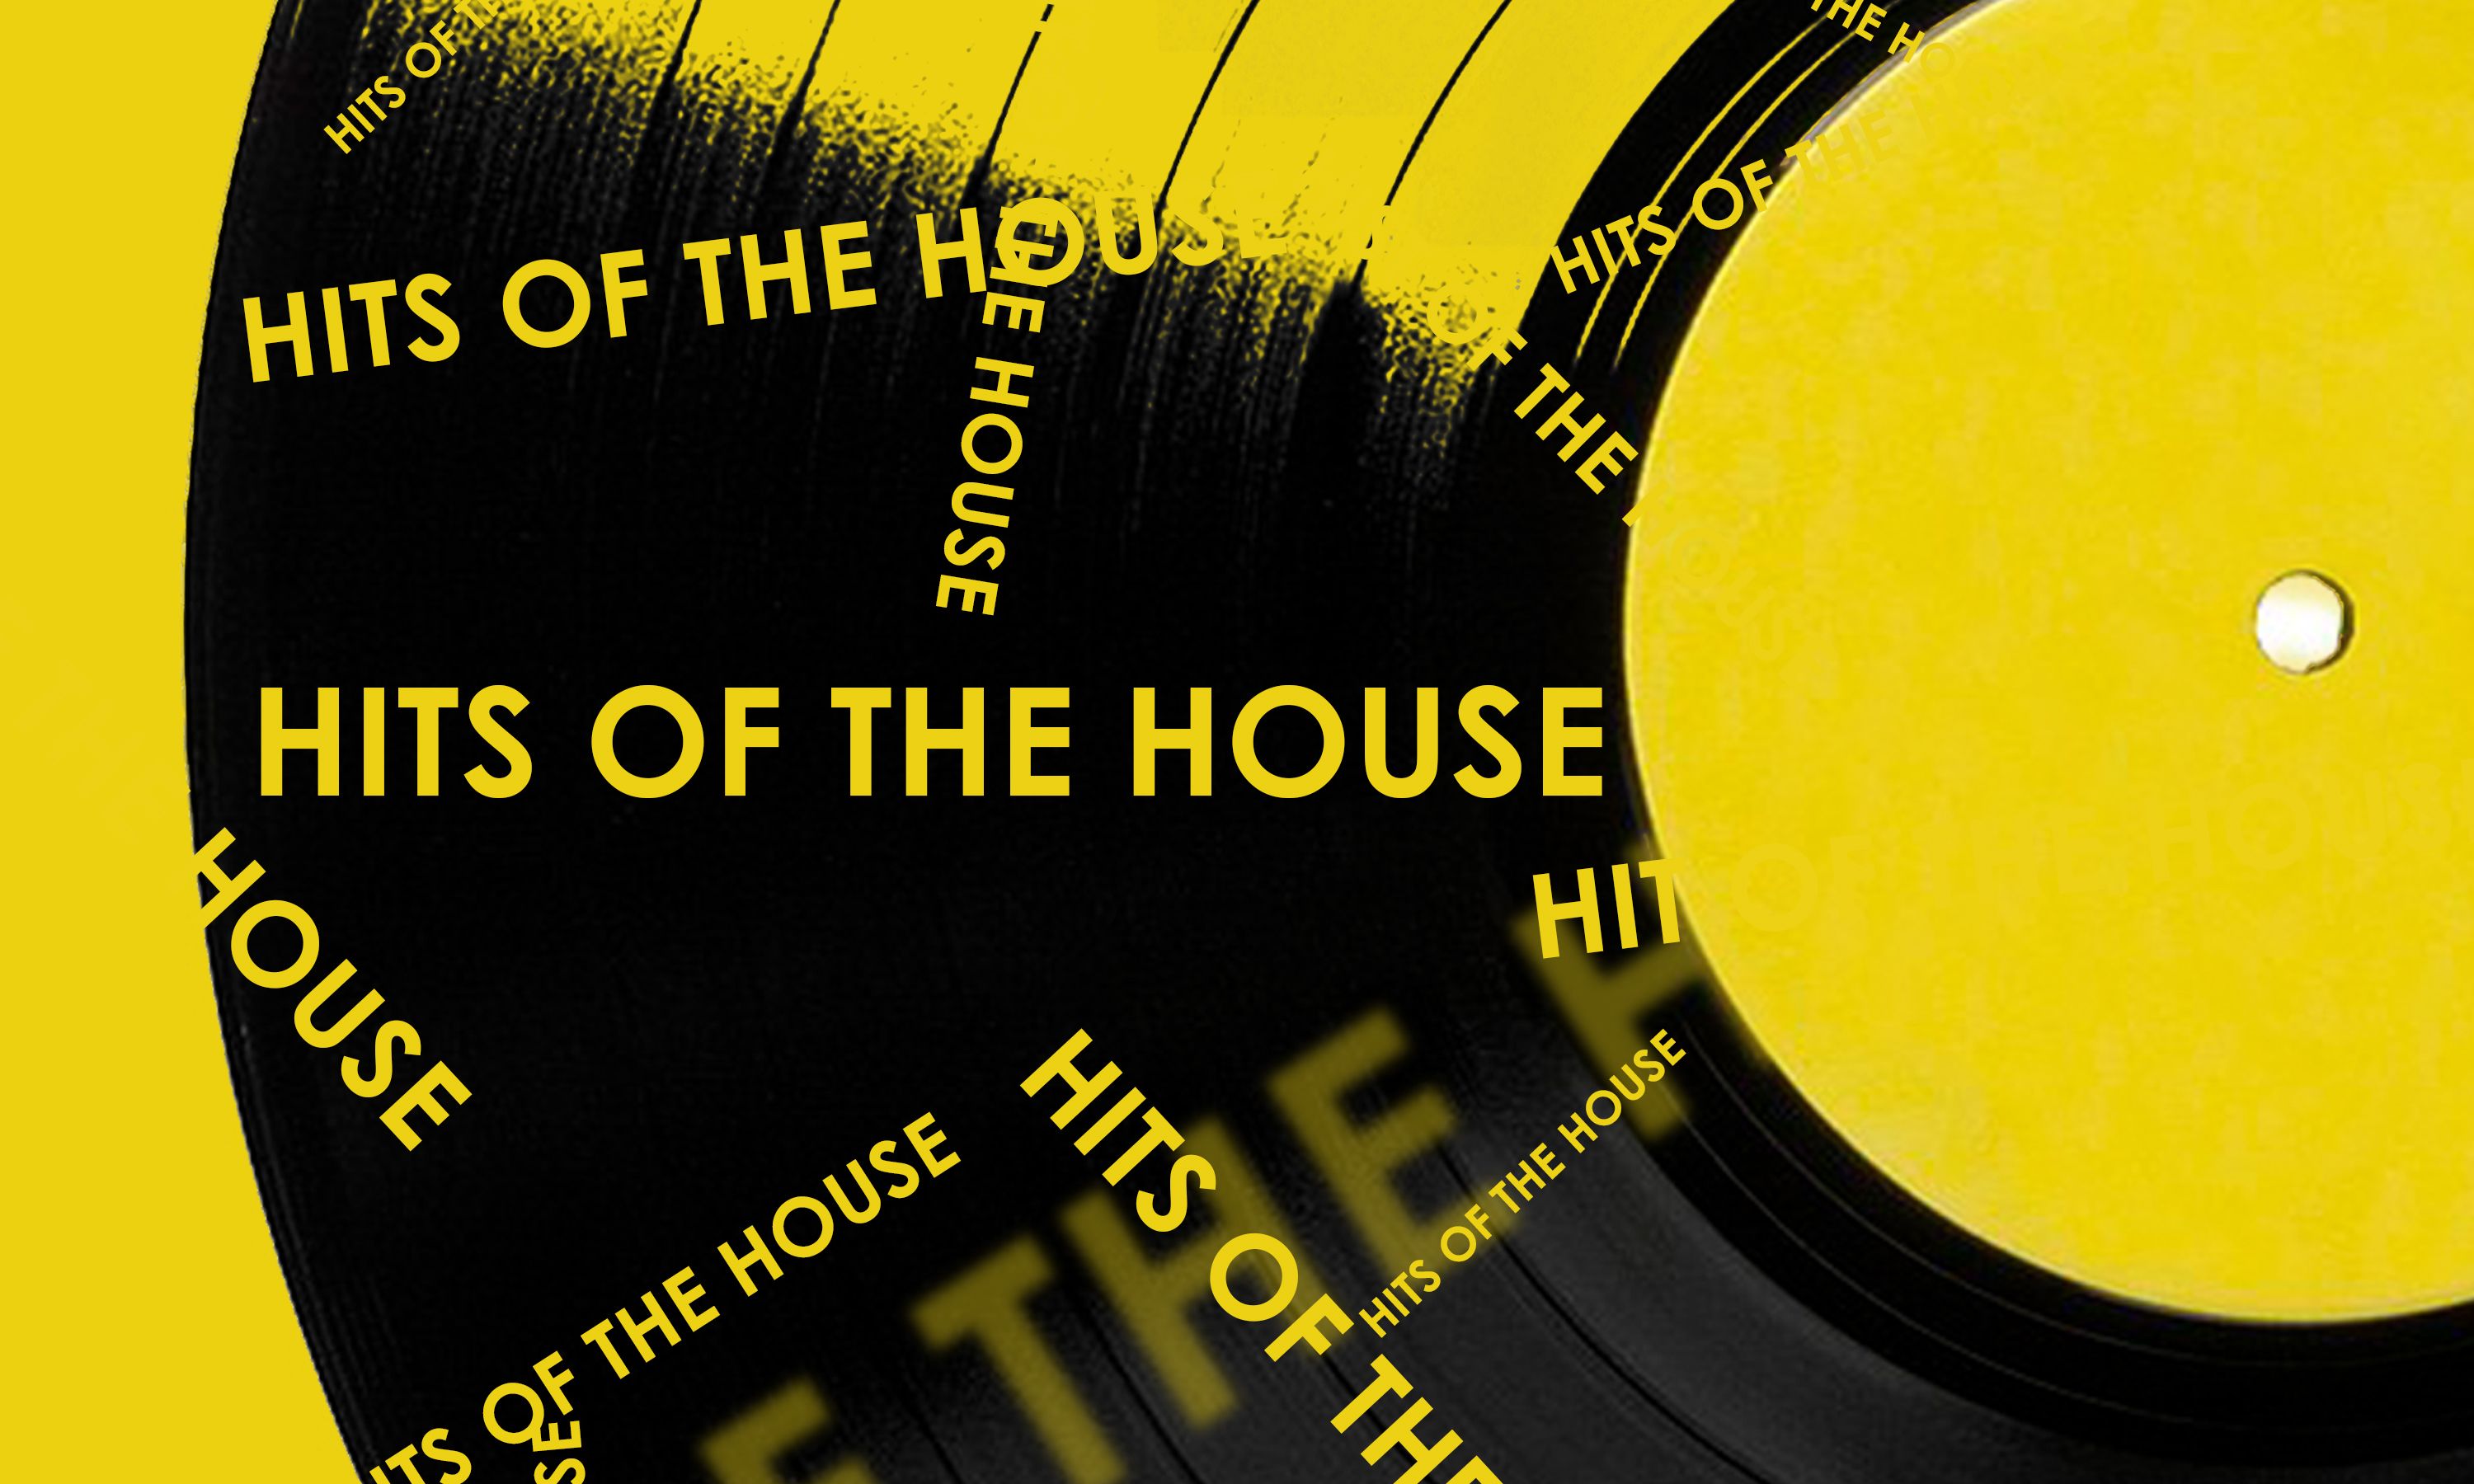 HITS OF THE HOUSE